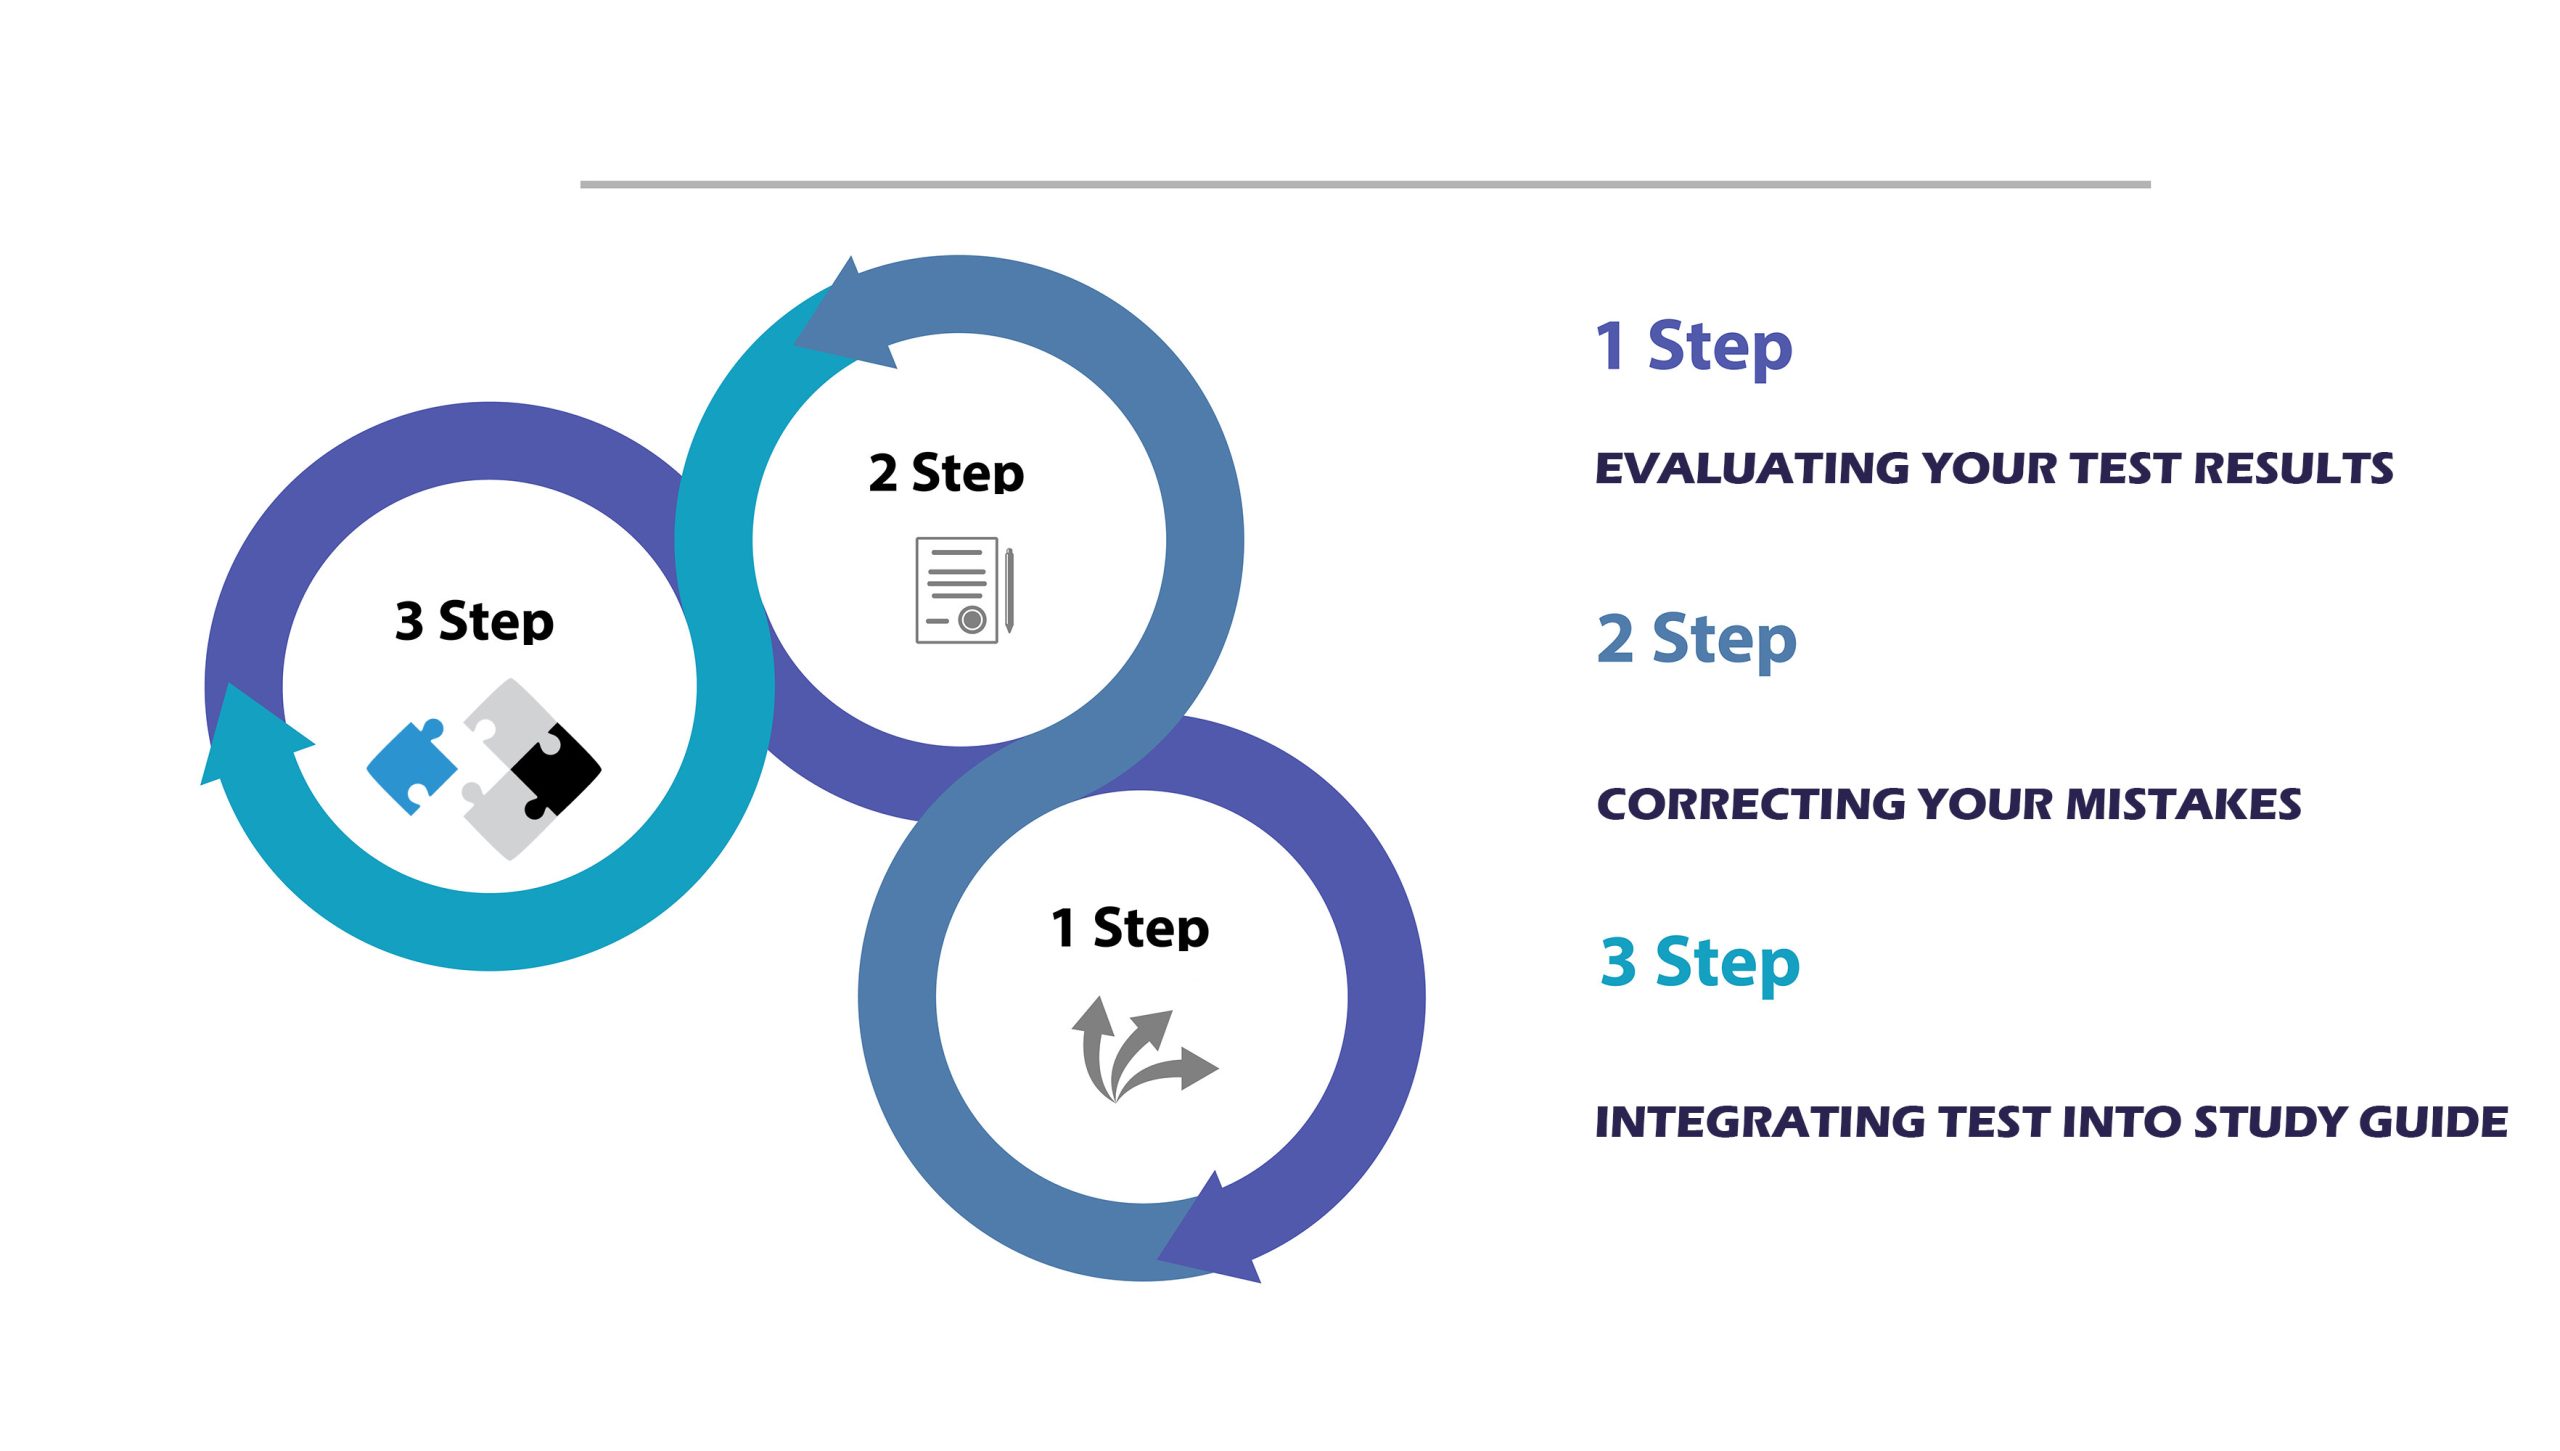 This image illustrastrates 3 step process of improving future results: Evaluating your test results, Correcting Your Mistakes, Integrating Your Test into Your Study Guide